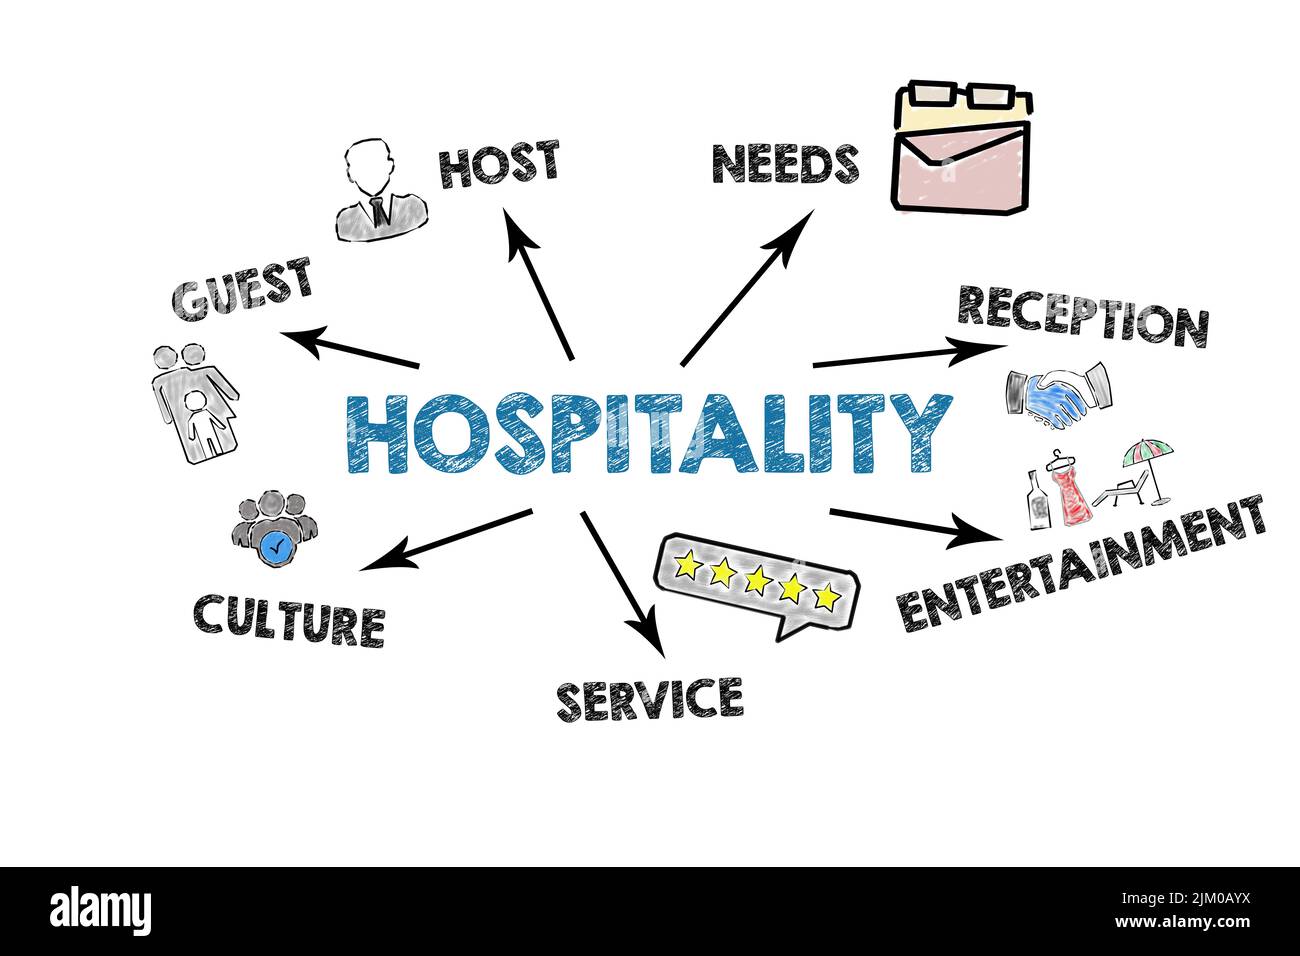 Hospitality. Illustrated chart with key words, icons and arrows on a white background. Stock Photo